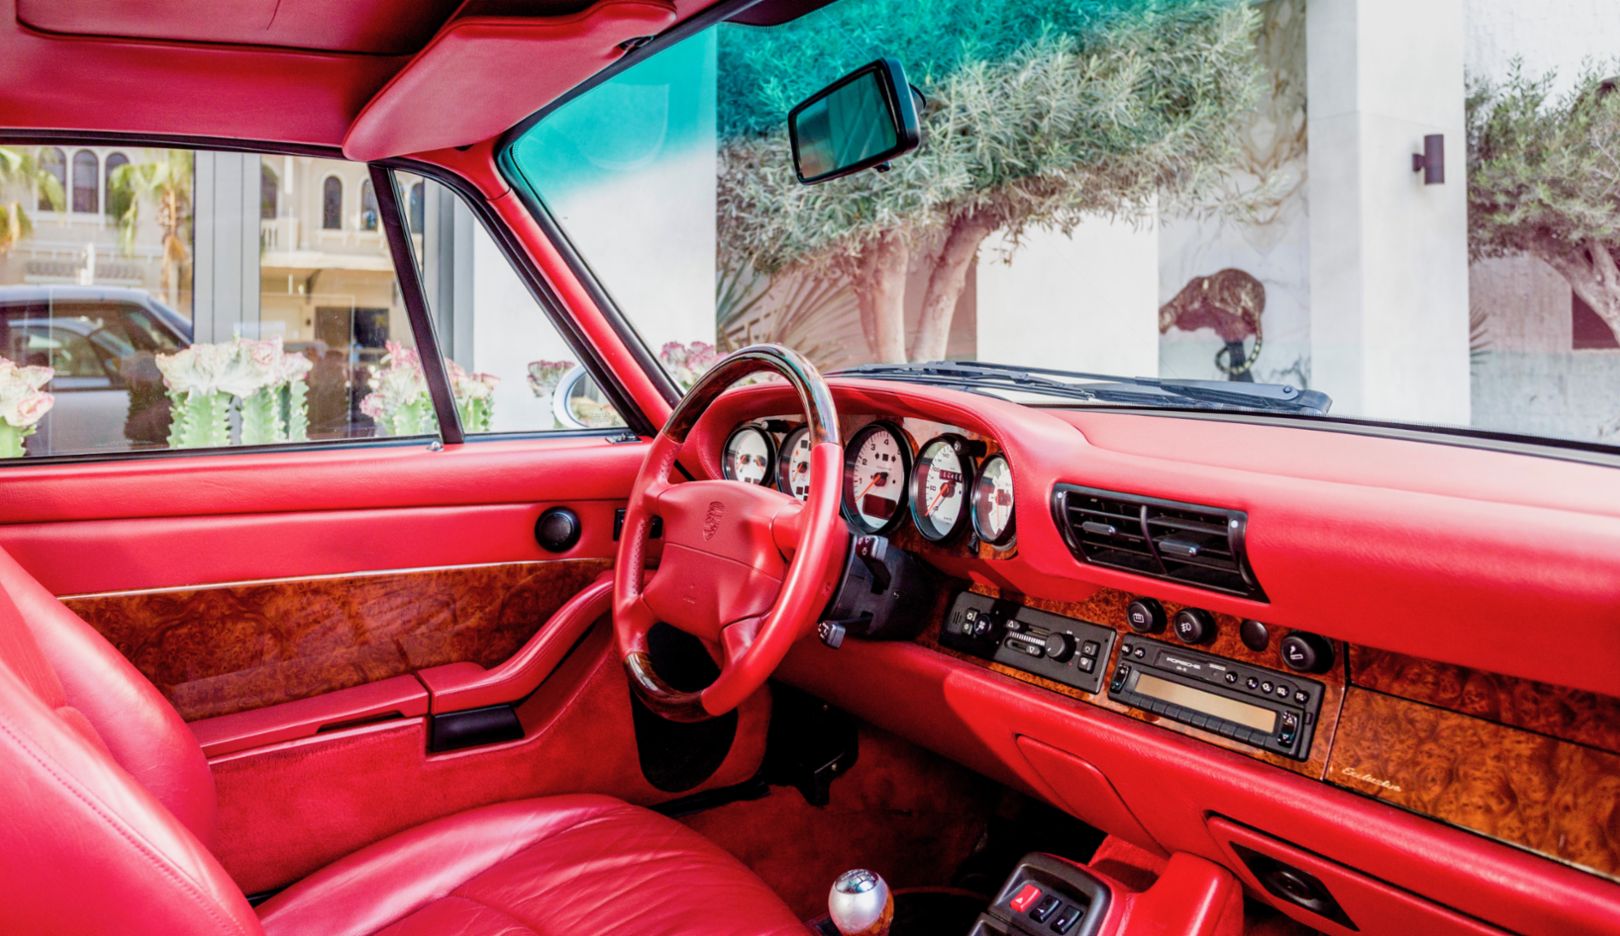 Each Porsche model in Karim Al Azhari’s collection enchants with its individual character. The red interior of the Porsche 911 Turbo is particularly eye-catching.